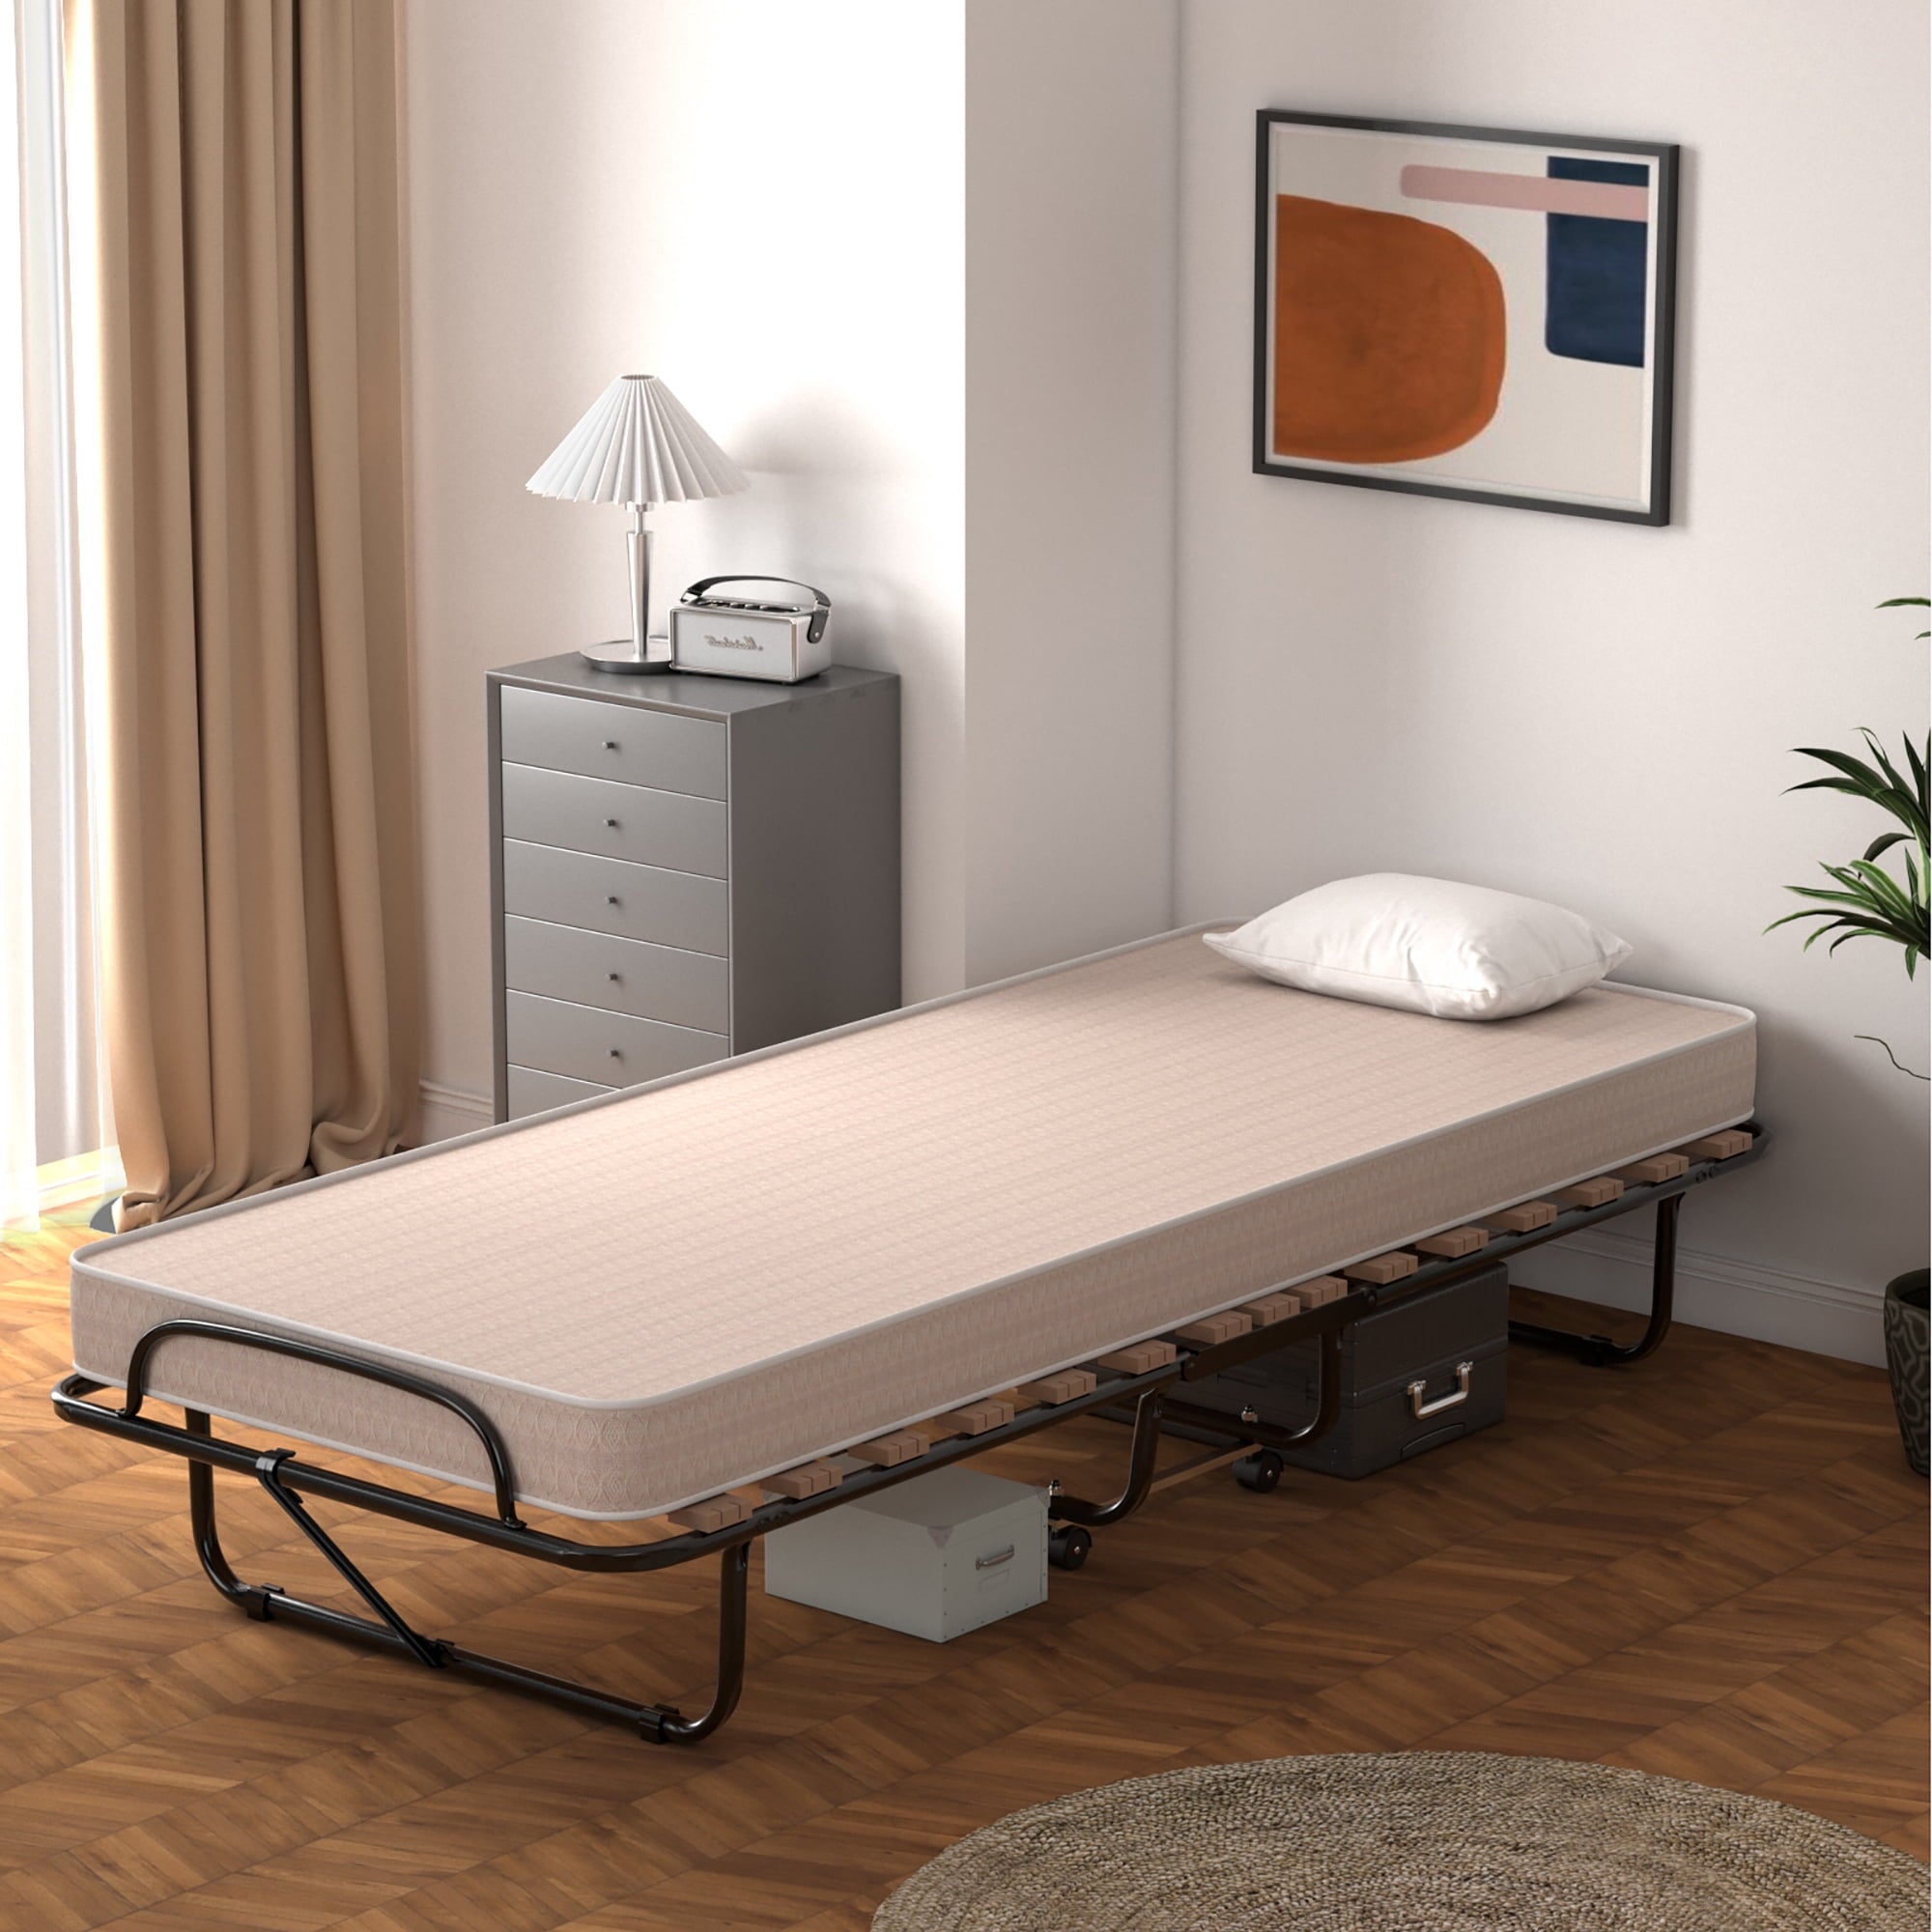 Portable Folding Bed with Memory Foam Mattress Rollaway Cot Beige Made in Italy